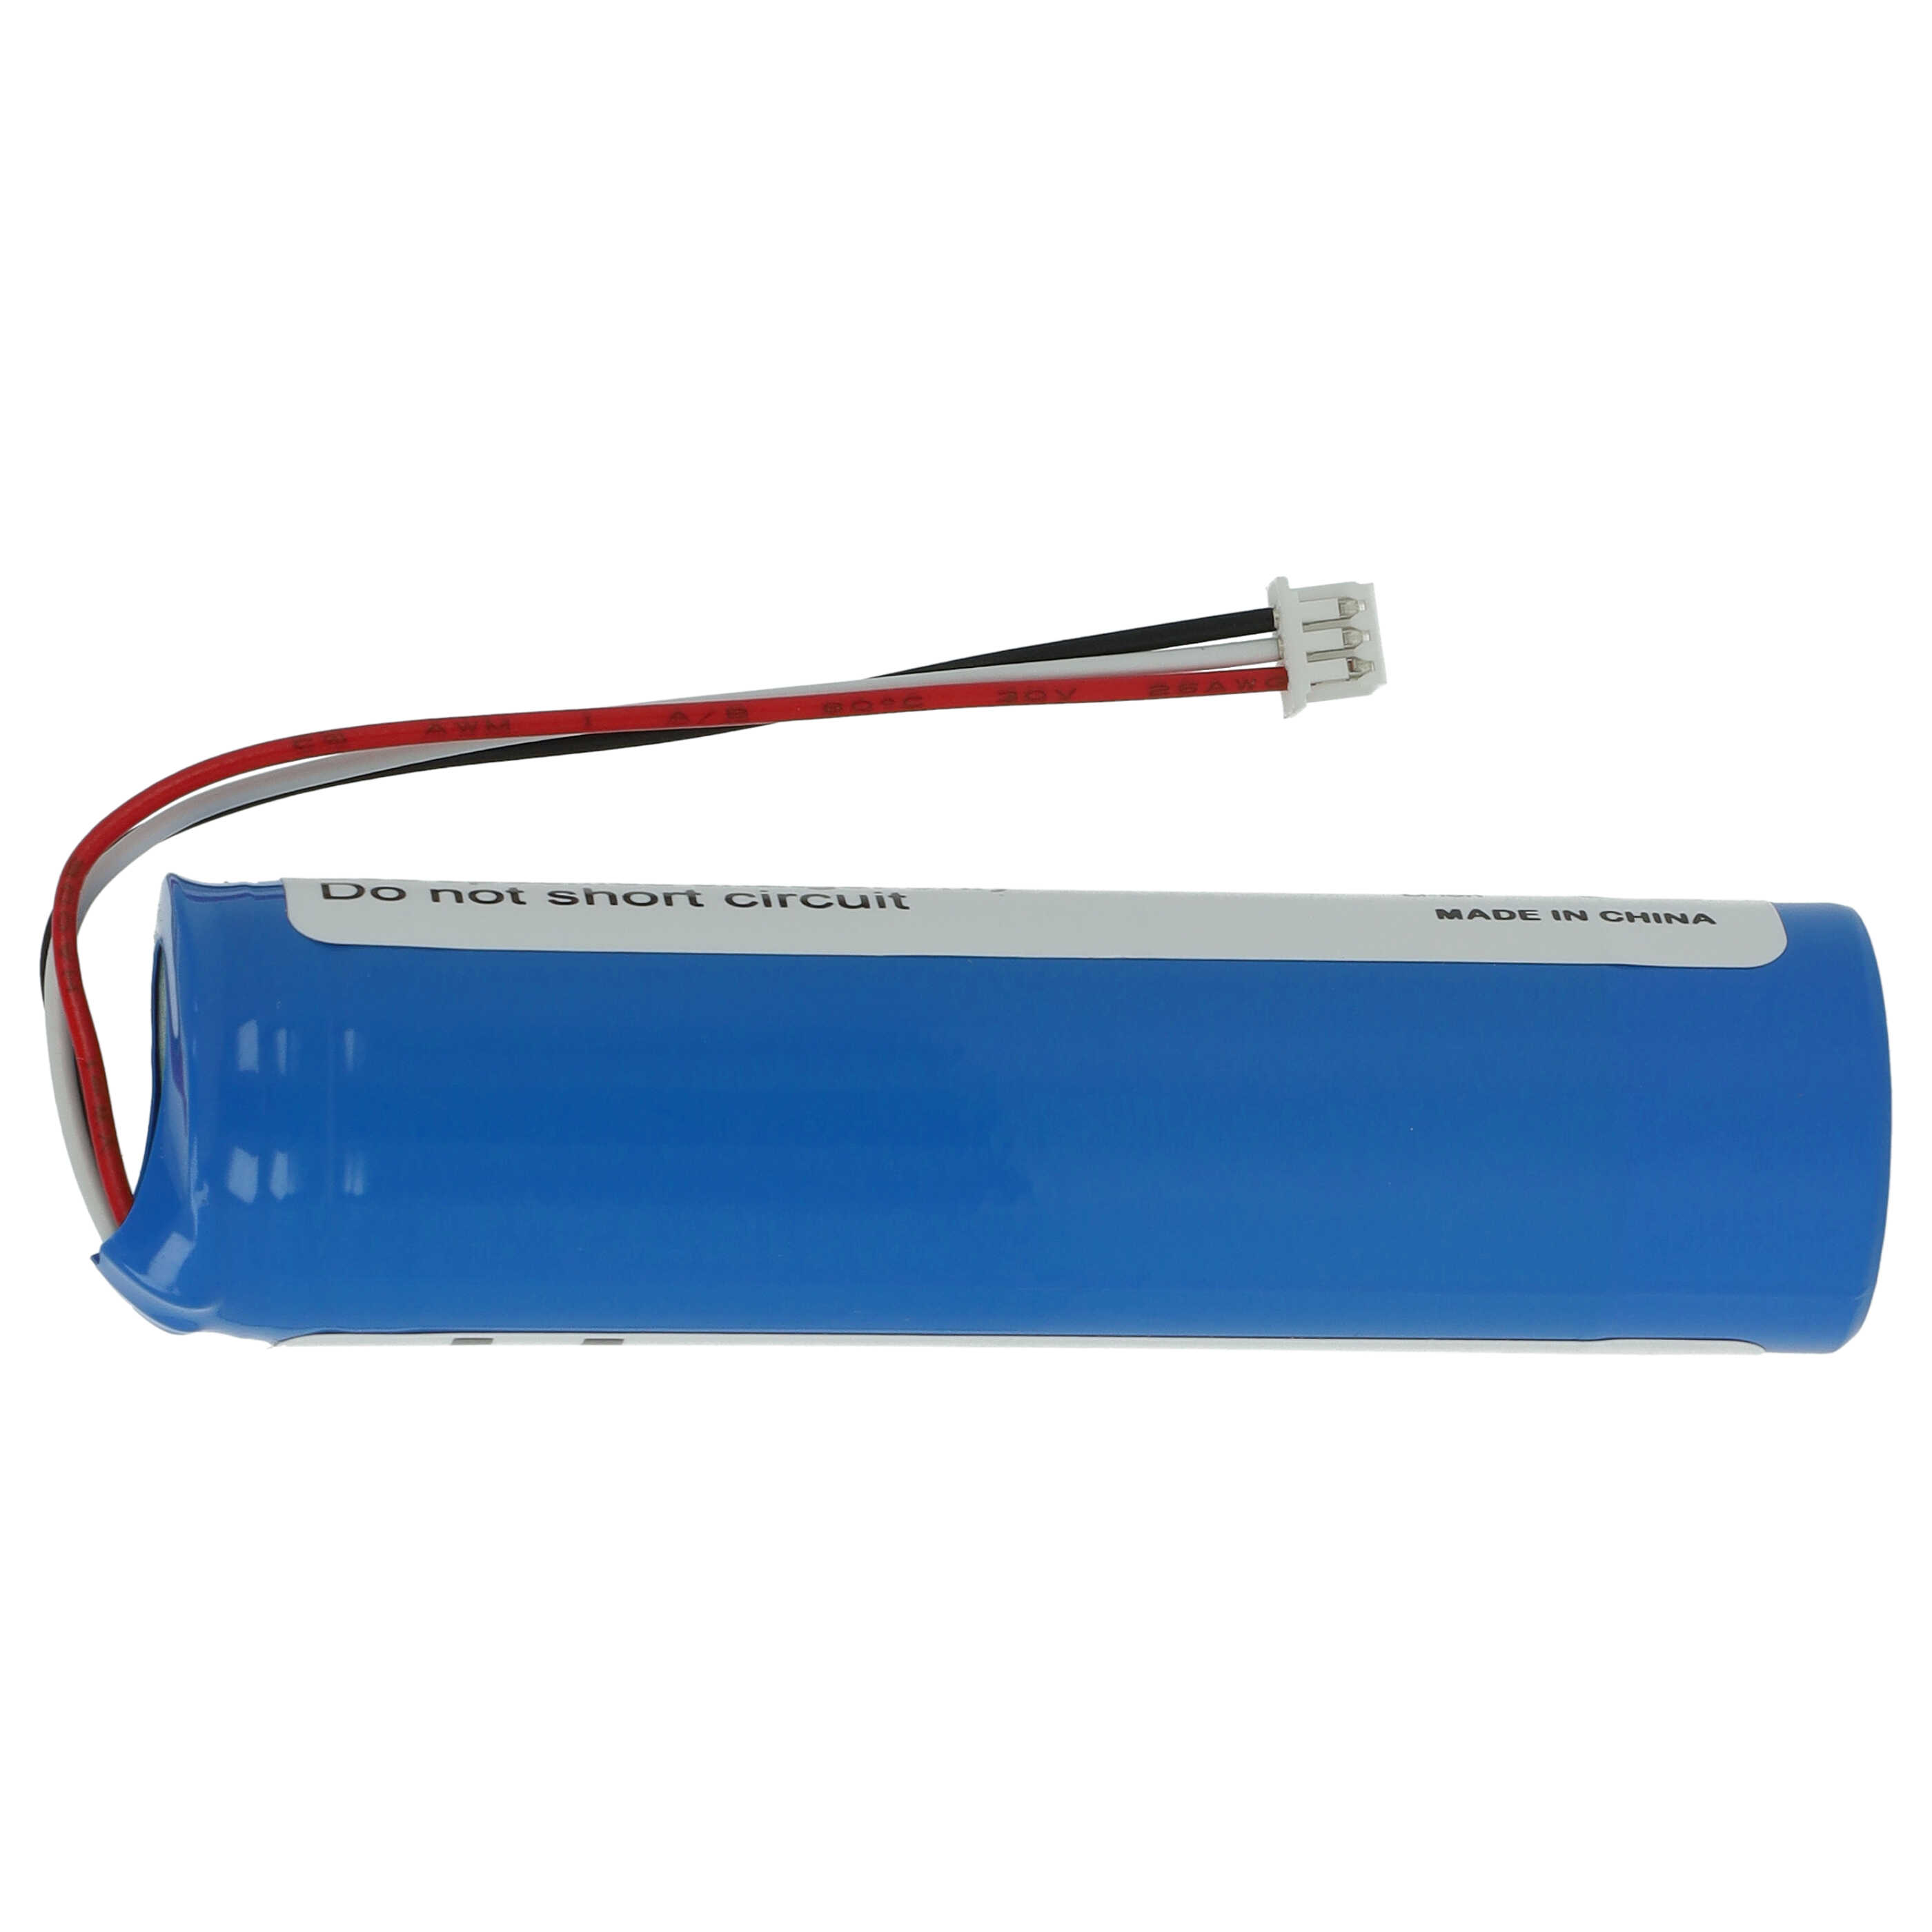 GPS Battery Replacement for TomTom MALAGA, 6027A0131301, 6027A0050901, L5 - 3000mAh, 3.7V